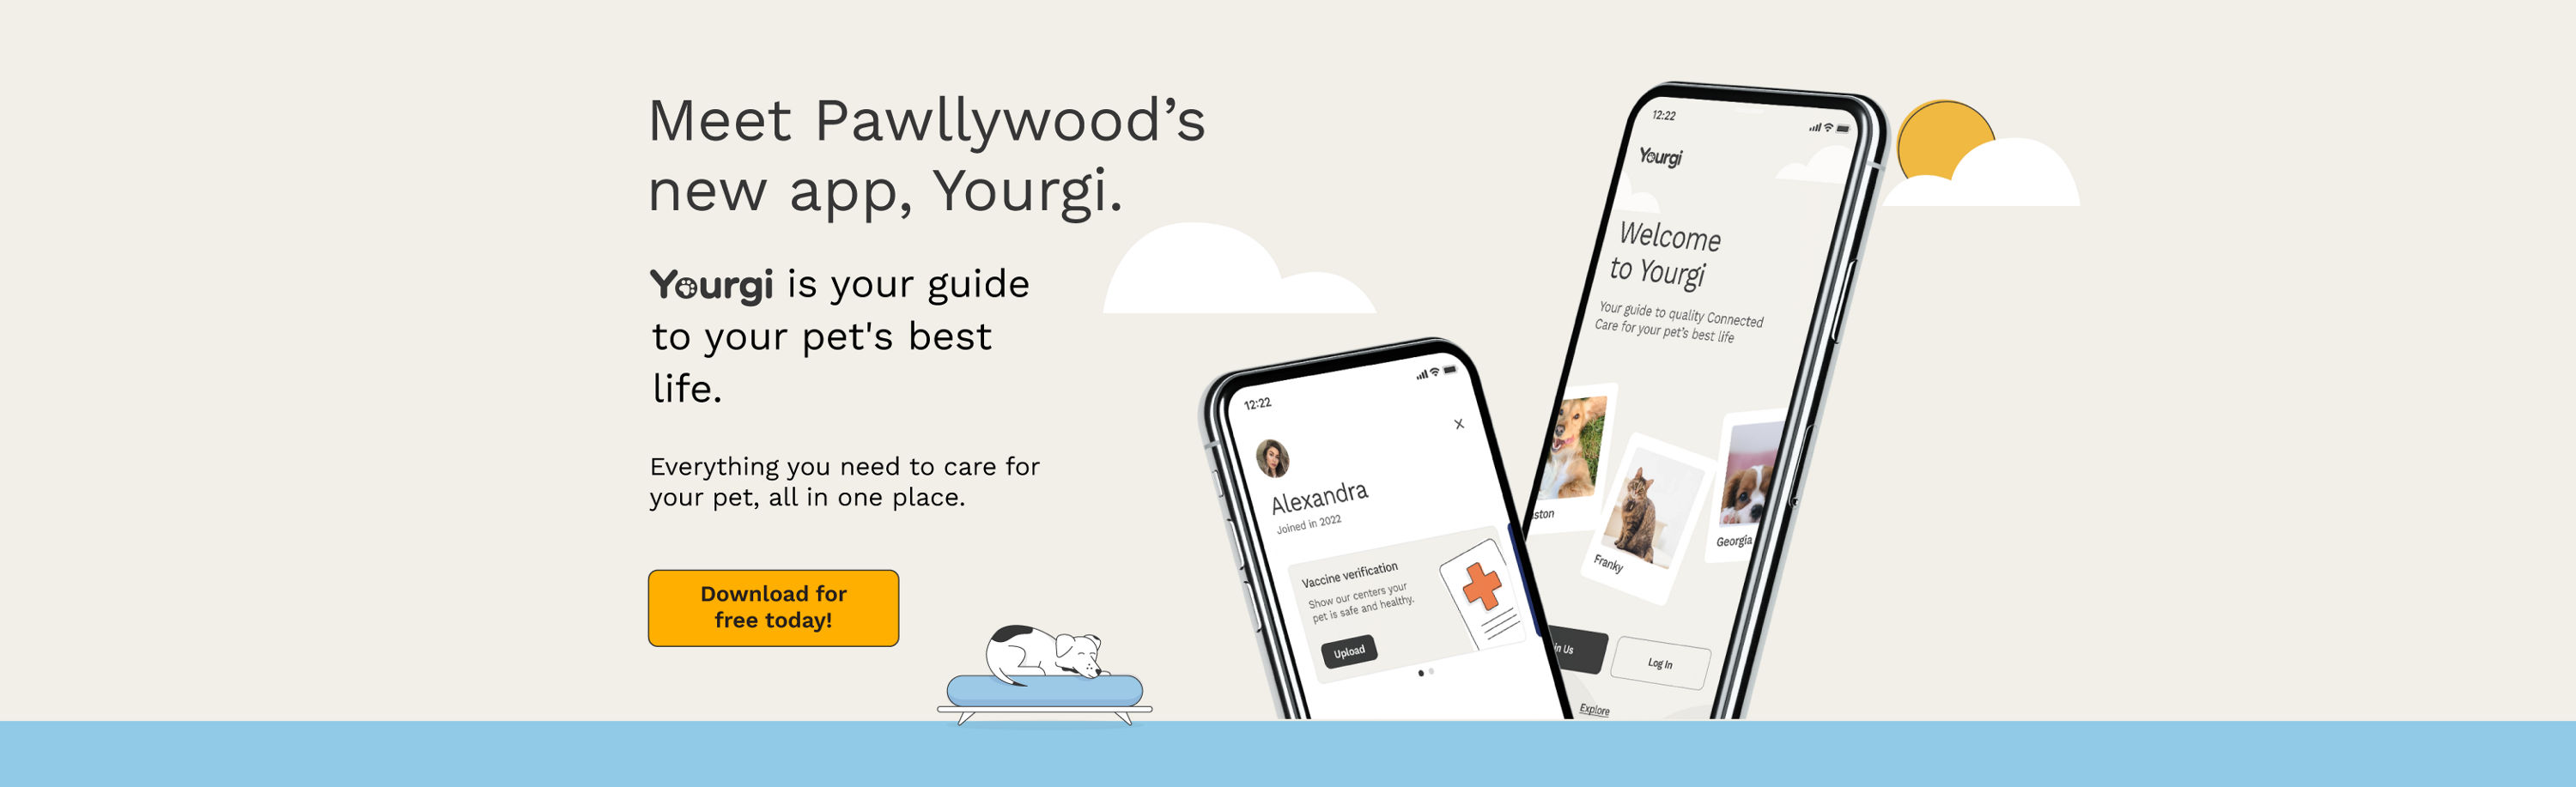 Meet Pawllywood's new app, Yourgi.